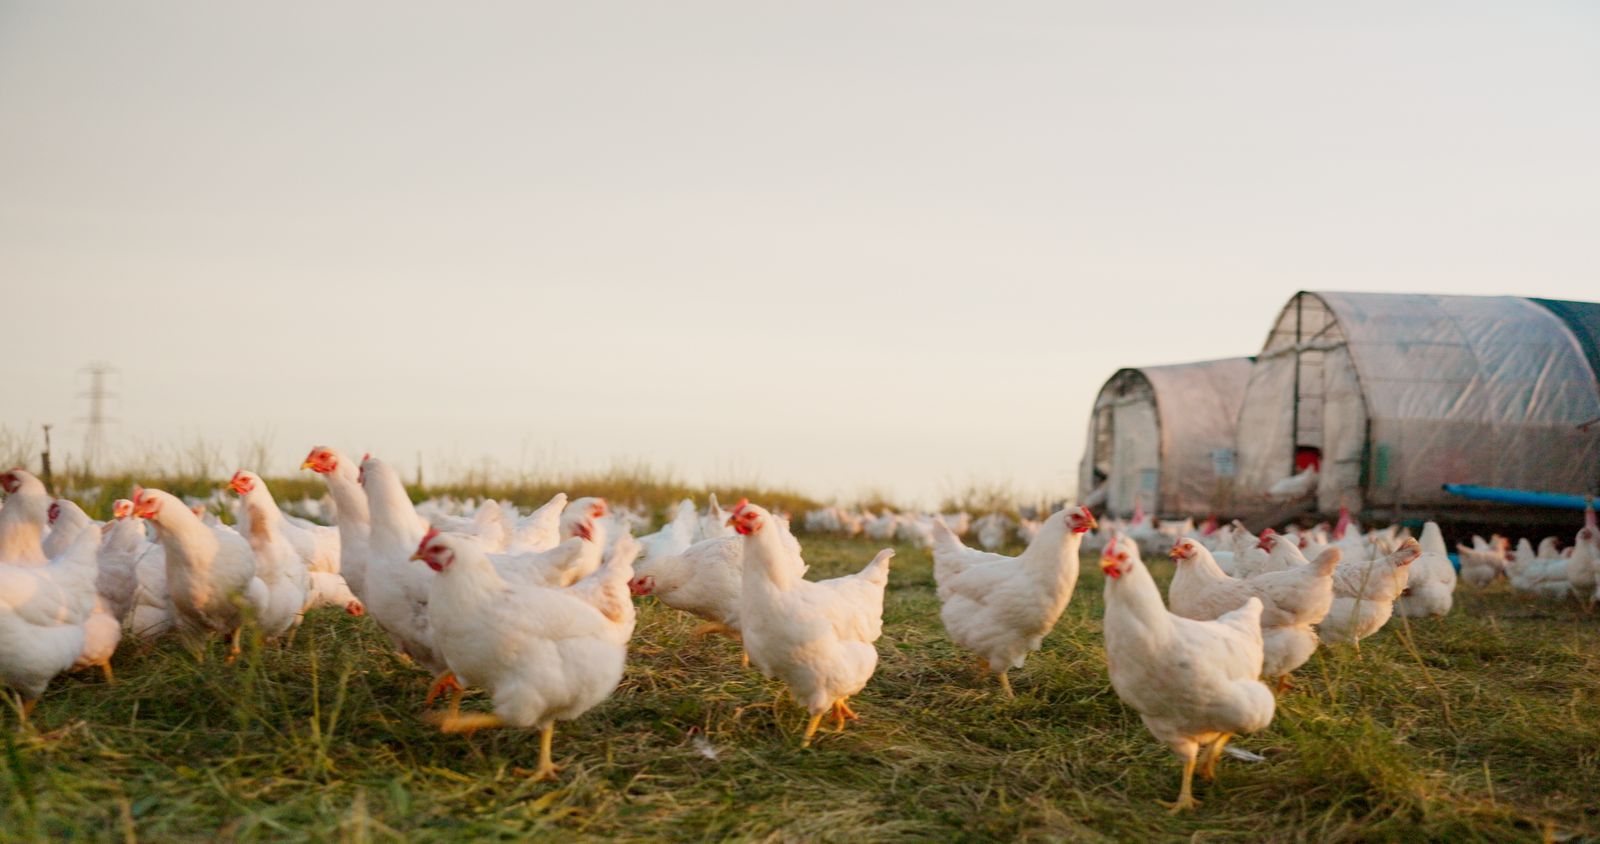 A long shot of chickens in a chicken farm in the countryside.